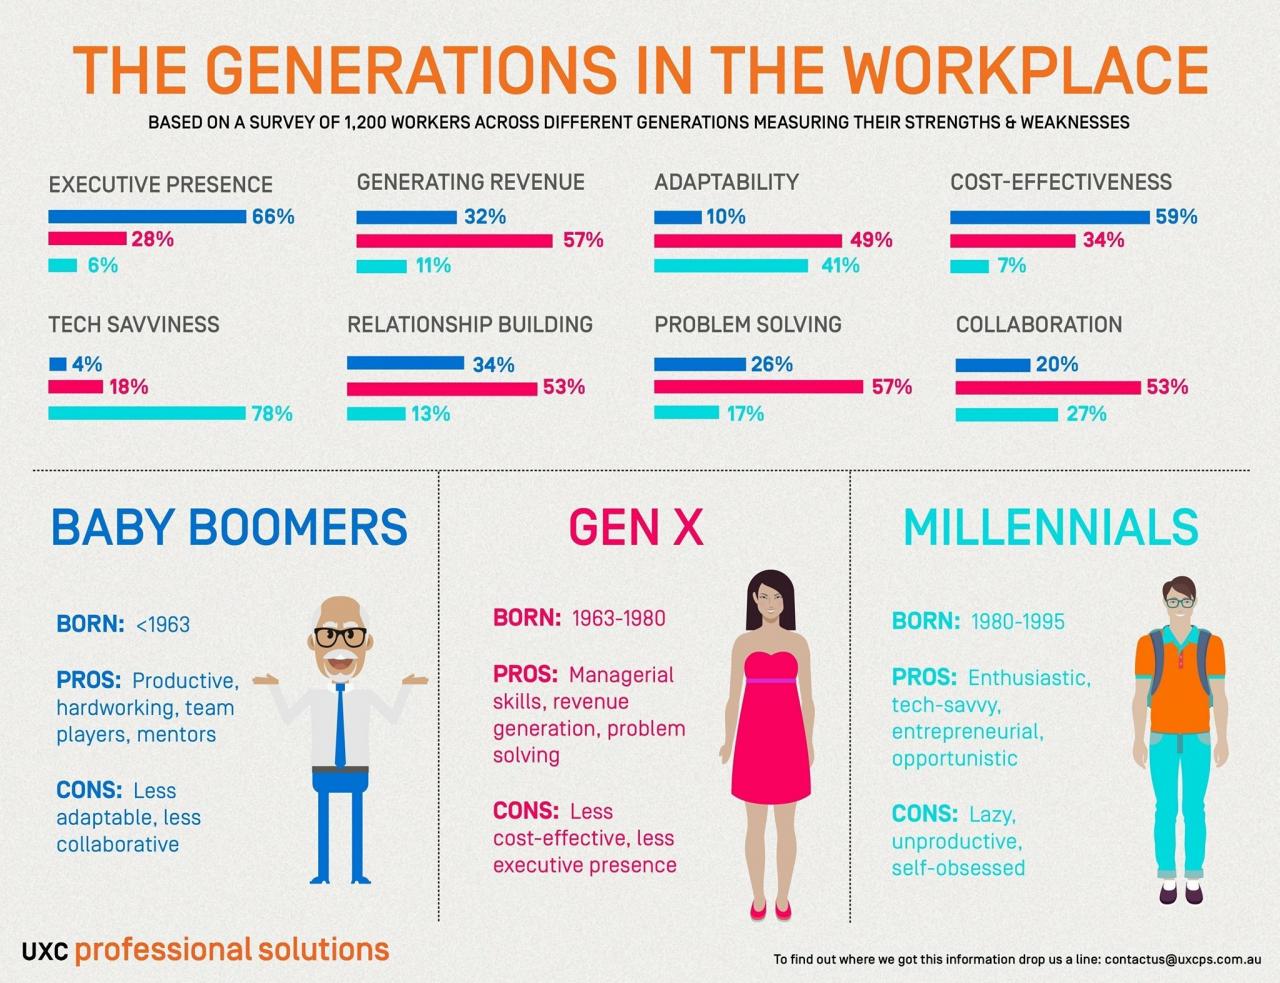 An overview of the working generations